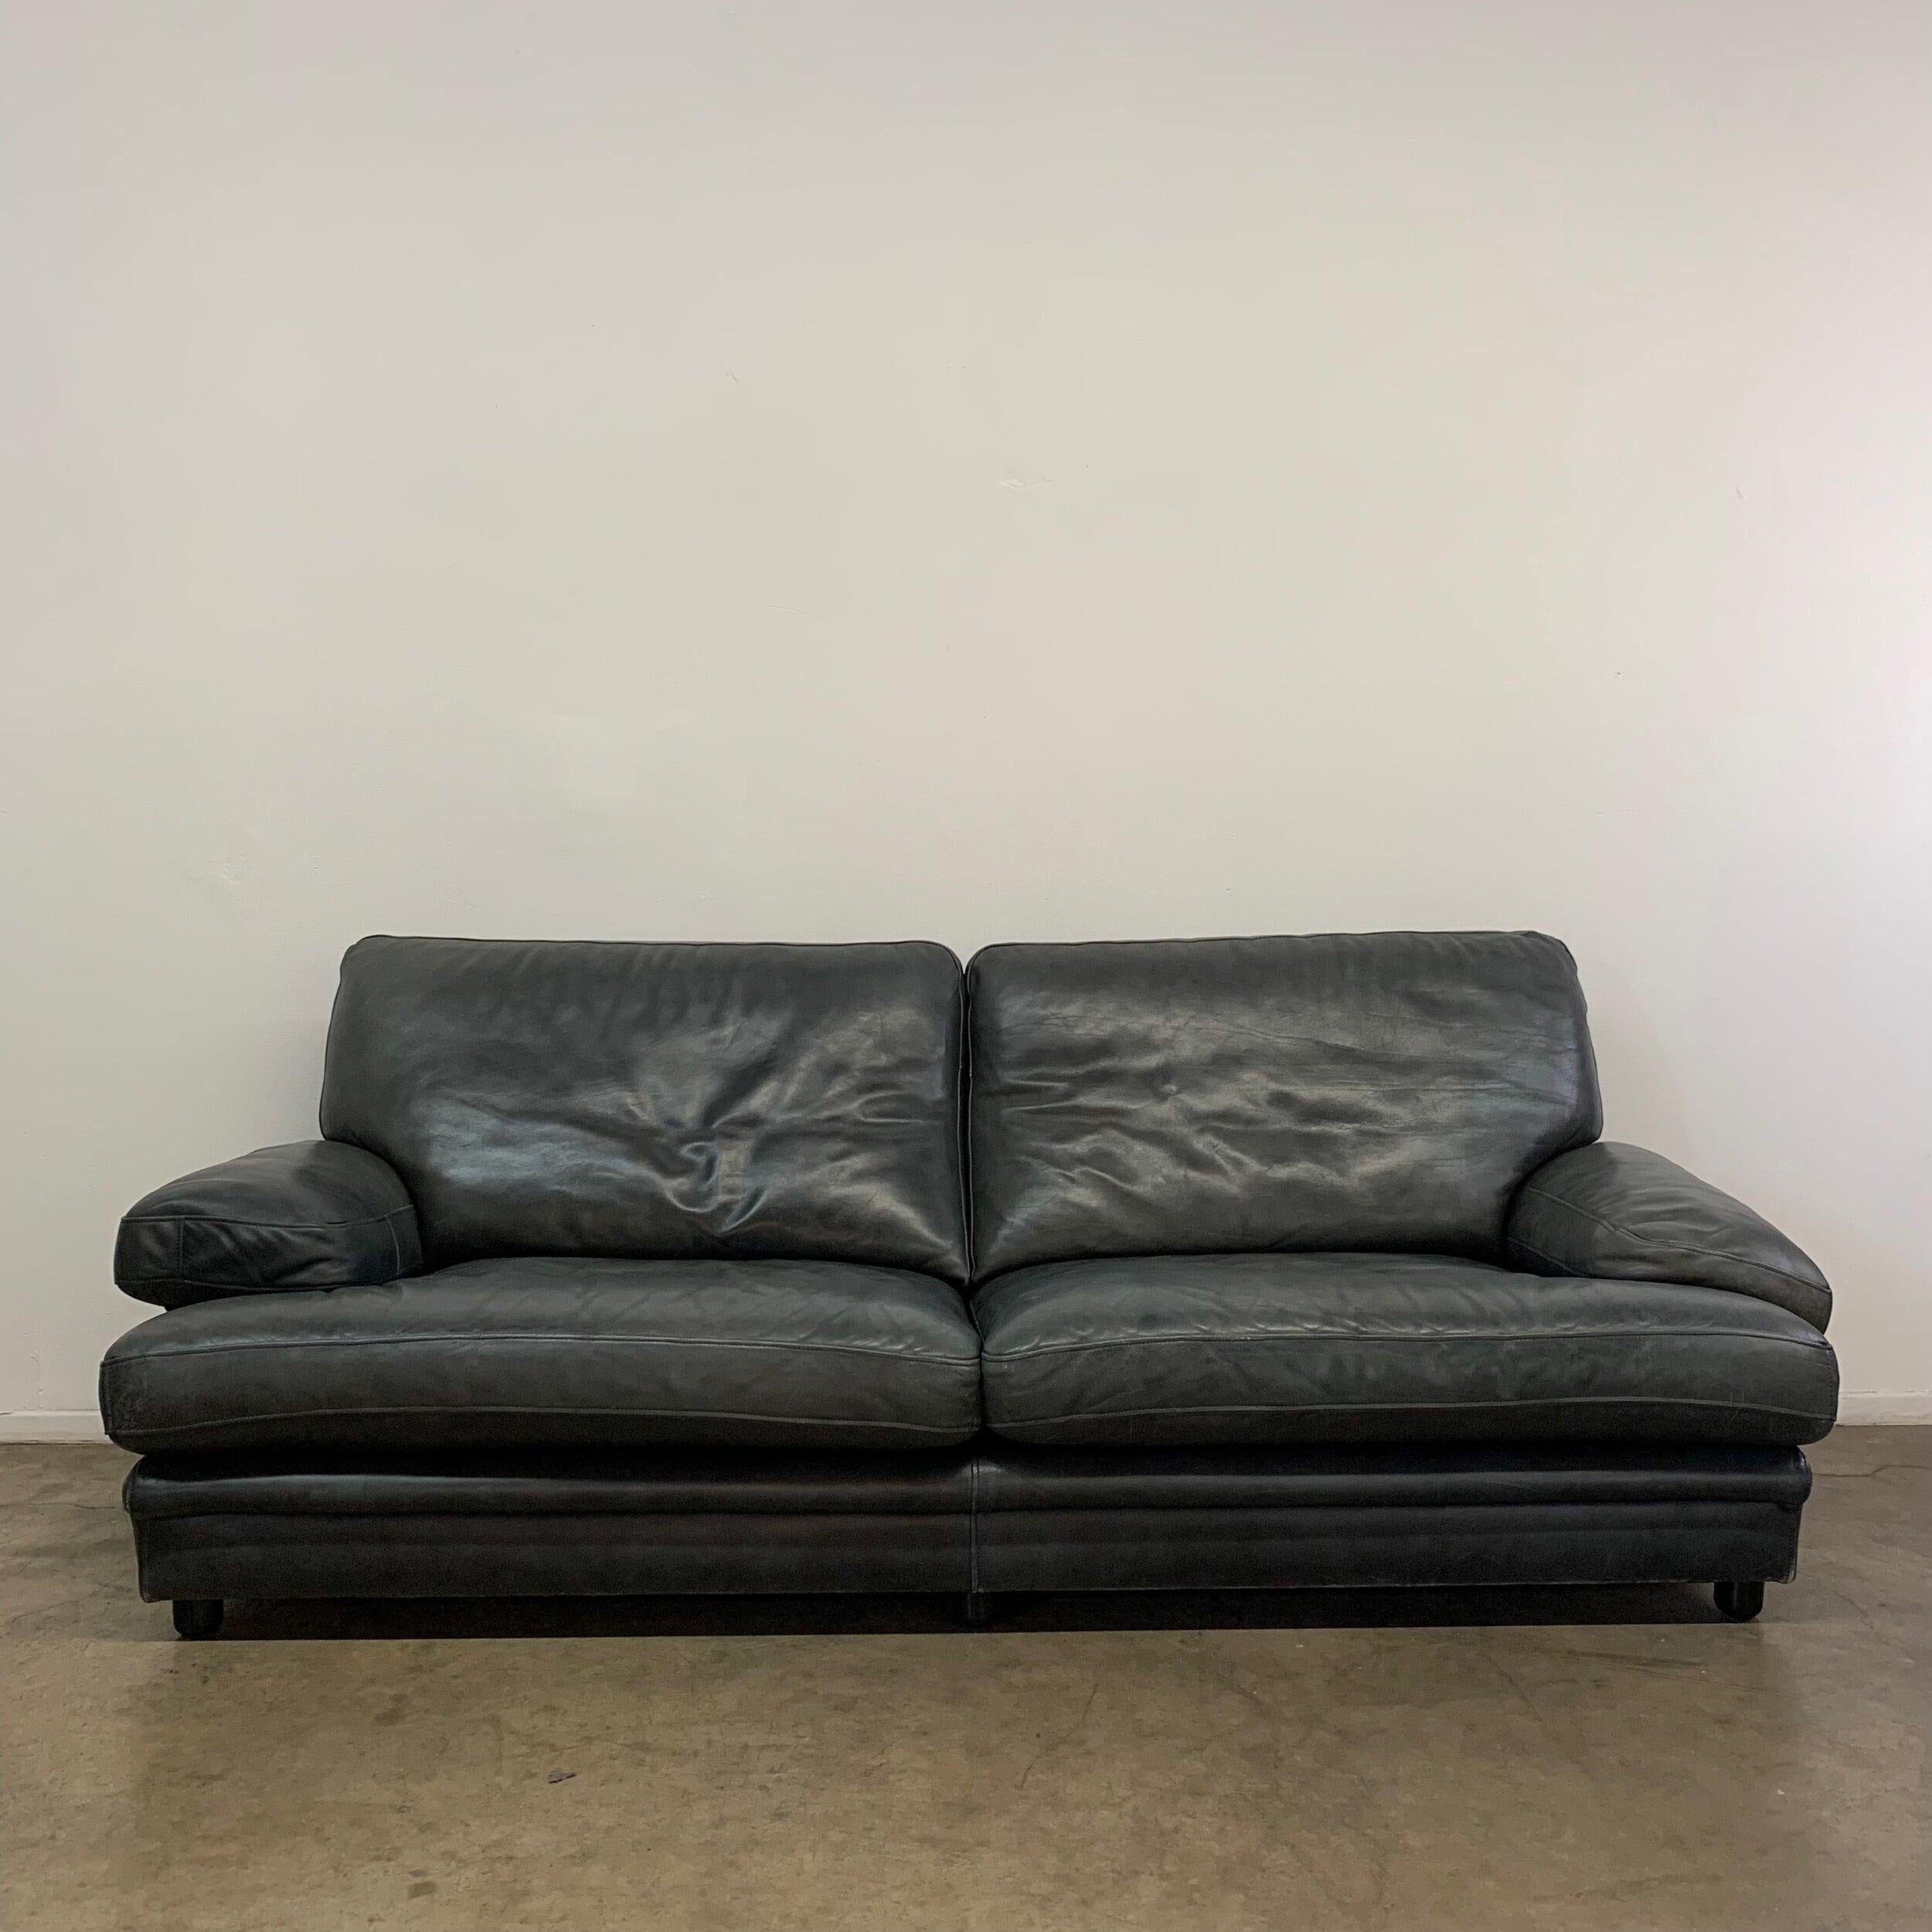 W87 D38.5 H34

SW62 SD20 AH4 SH16.25

Distressed black leather feather down sofa by Roche Bobois. Leather has no rips or tears and leather is thick and in well preserved condition.